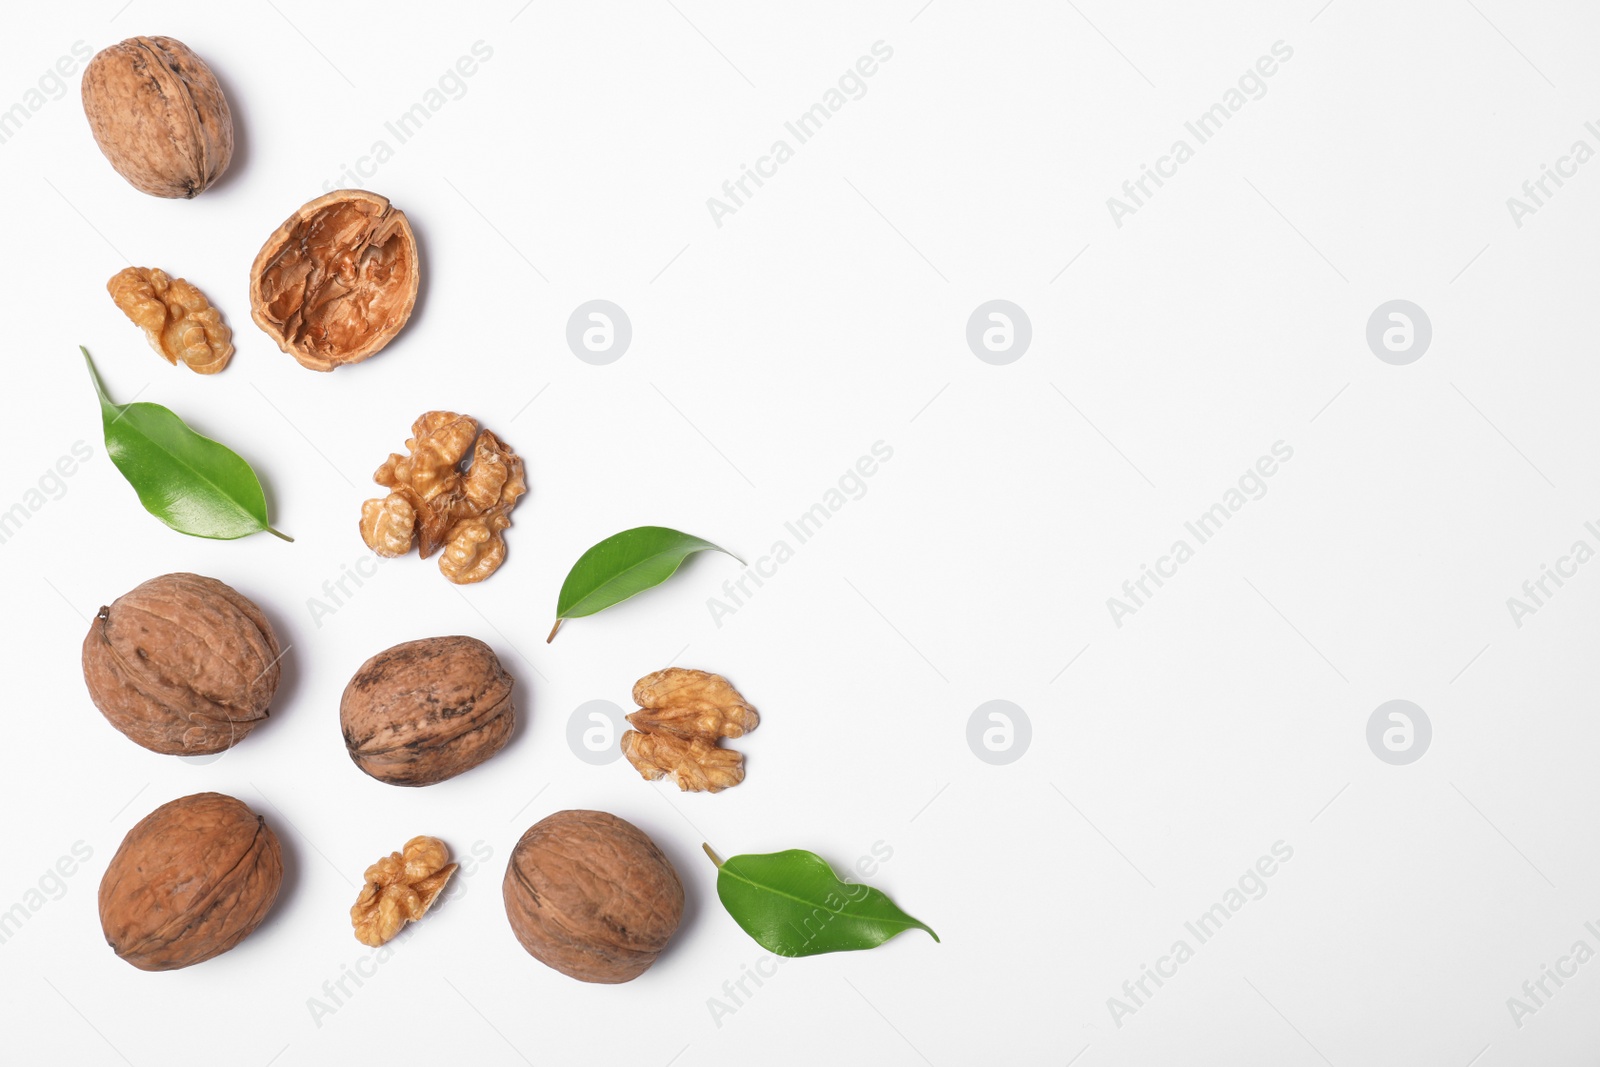 Photo of Walnuts with leaves on white background, flat lay with space for text